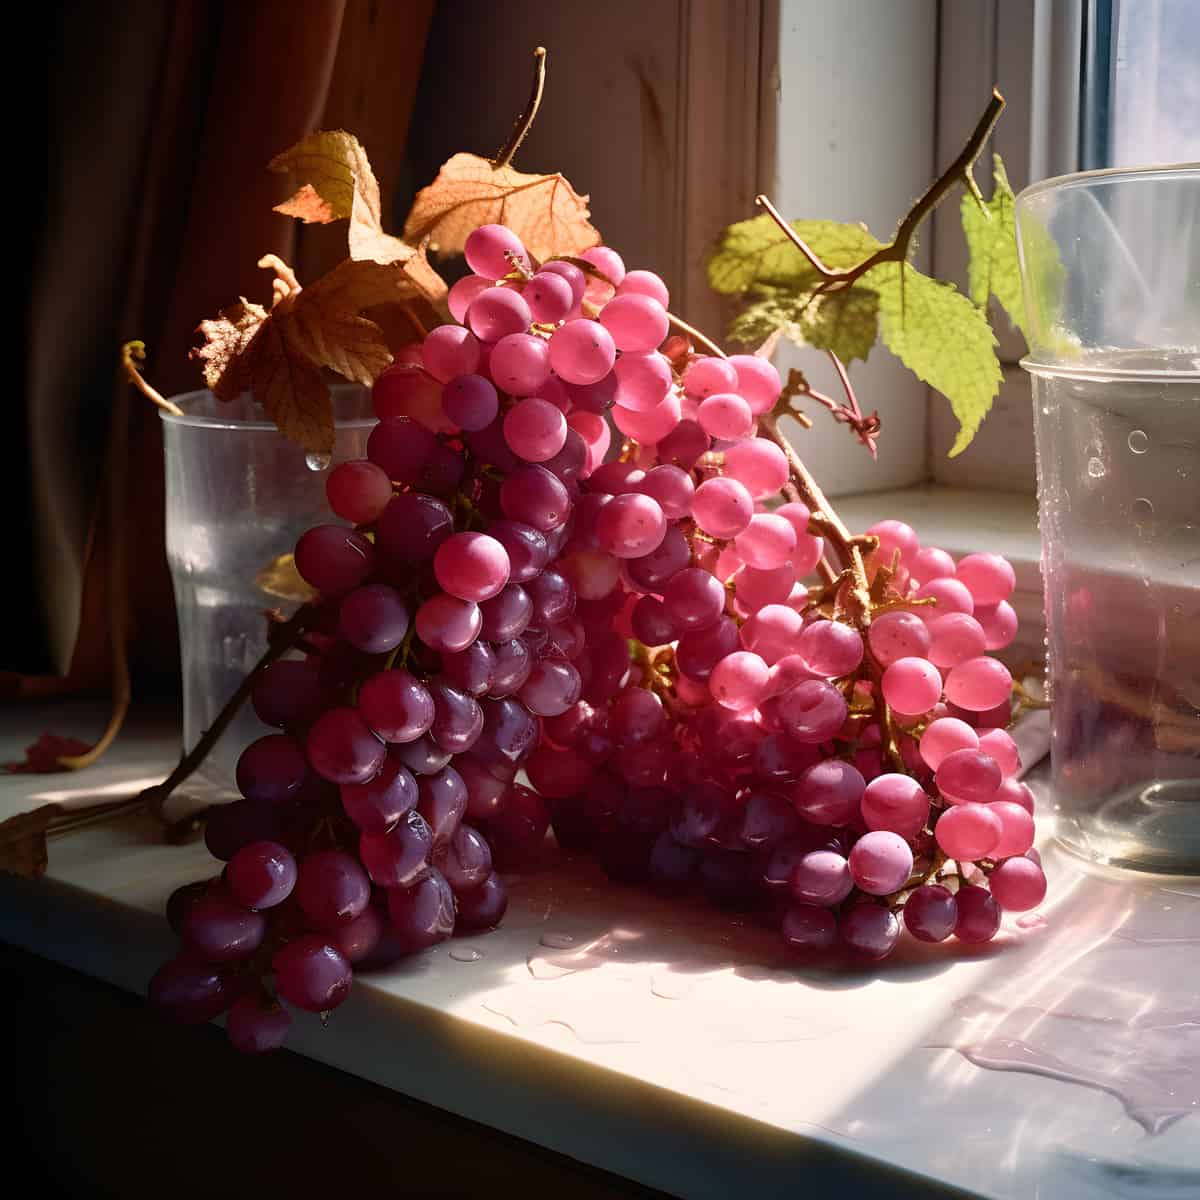 Fox Grapes on a kitchen counter